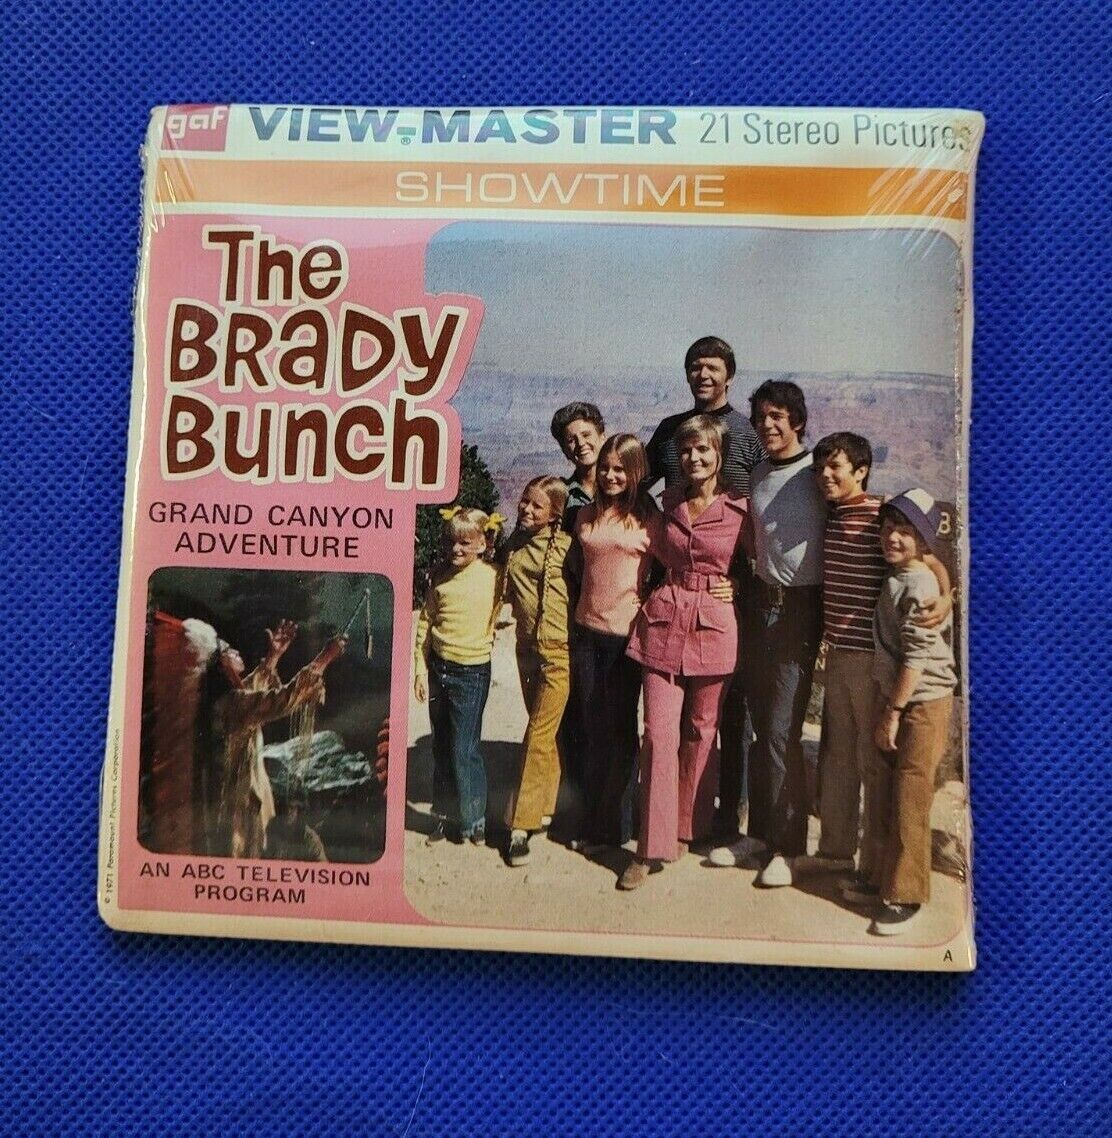 SEALED B568 The Brady Bunch TV Show Florence Henderson view-master Reels Packet